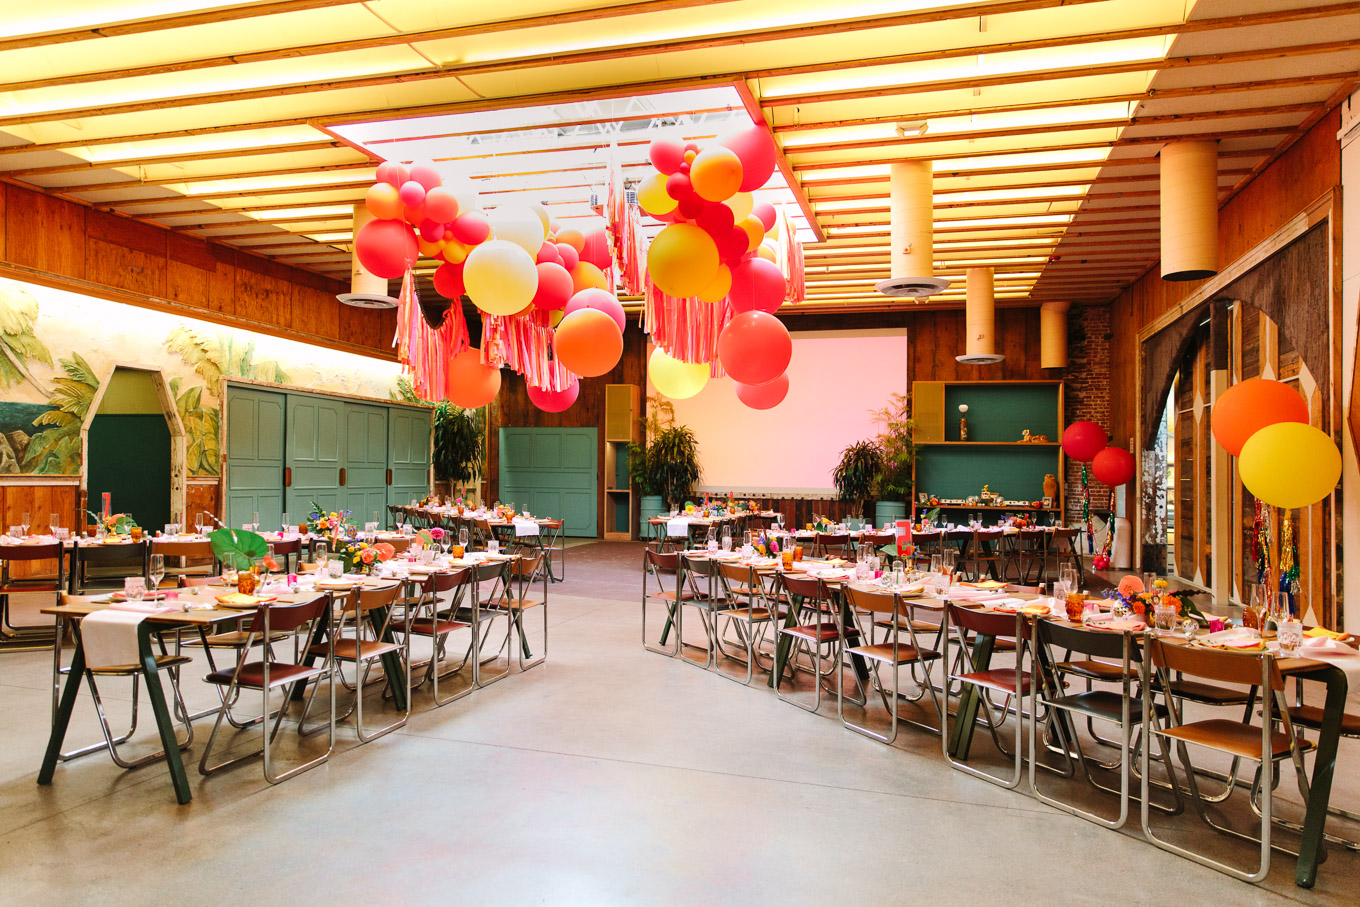 Colorful wedding reception with streamers balloons and bright flowers | Colorful Downtown Los Angeles Valentine Wedding | Los Angeles wedding photographer | #losangeleswedding #colorfulwedding #DTLA #valentinedtla   Source: Mary Costa Photography | Los Angeles